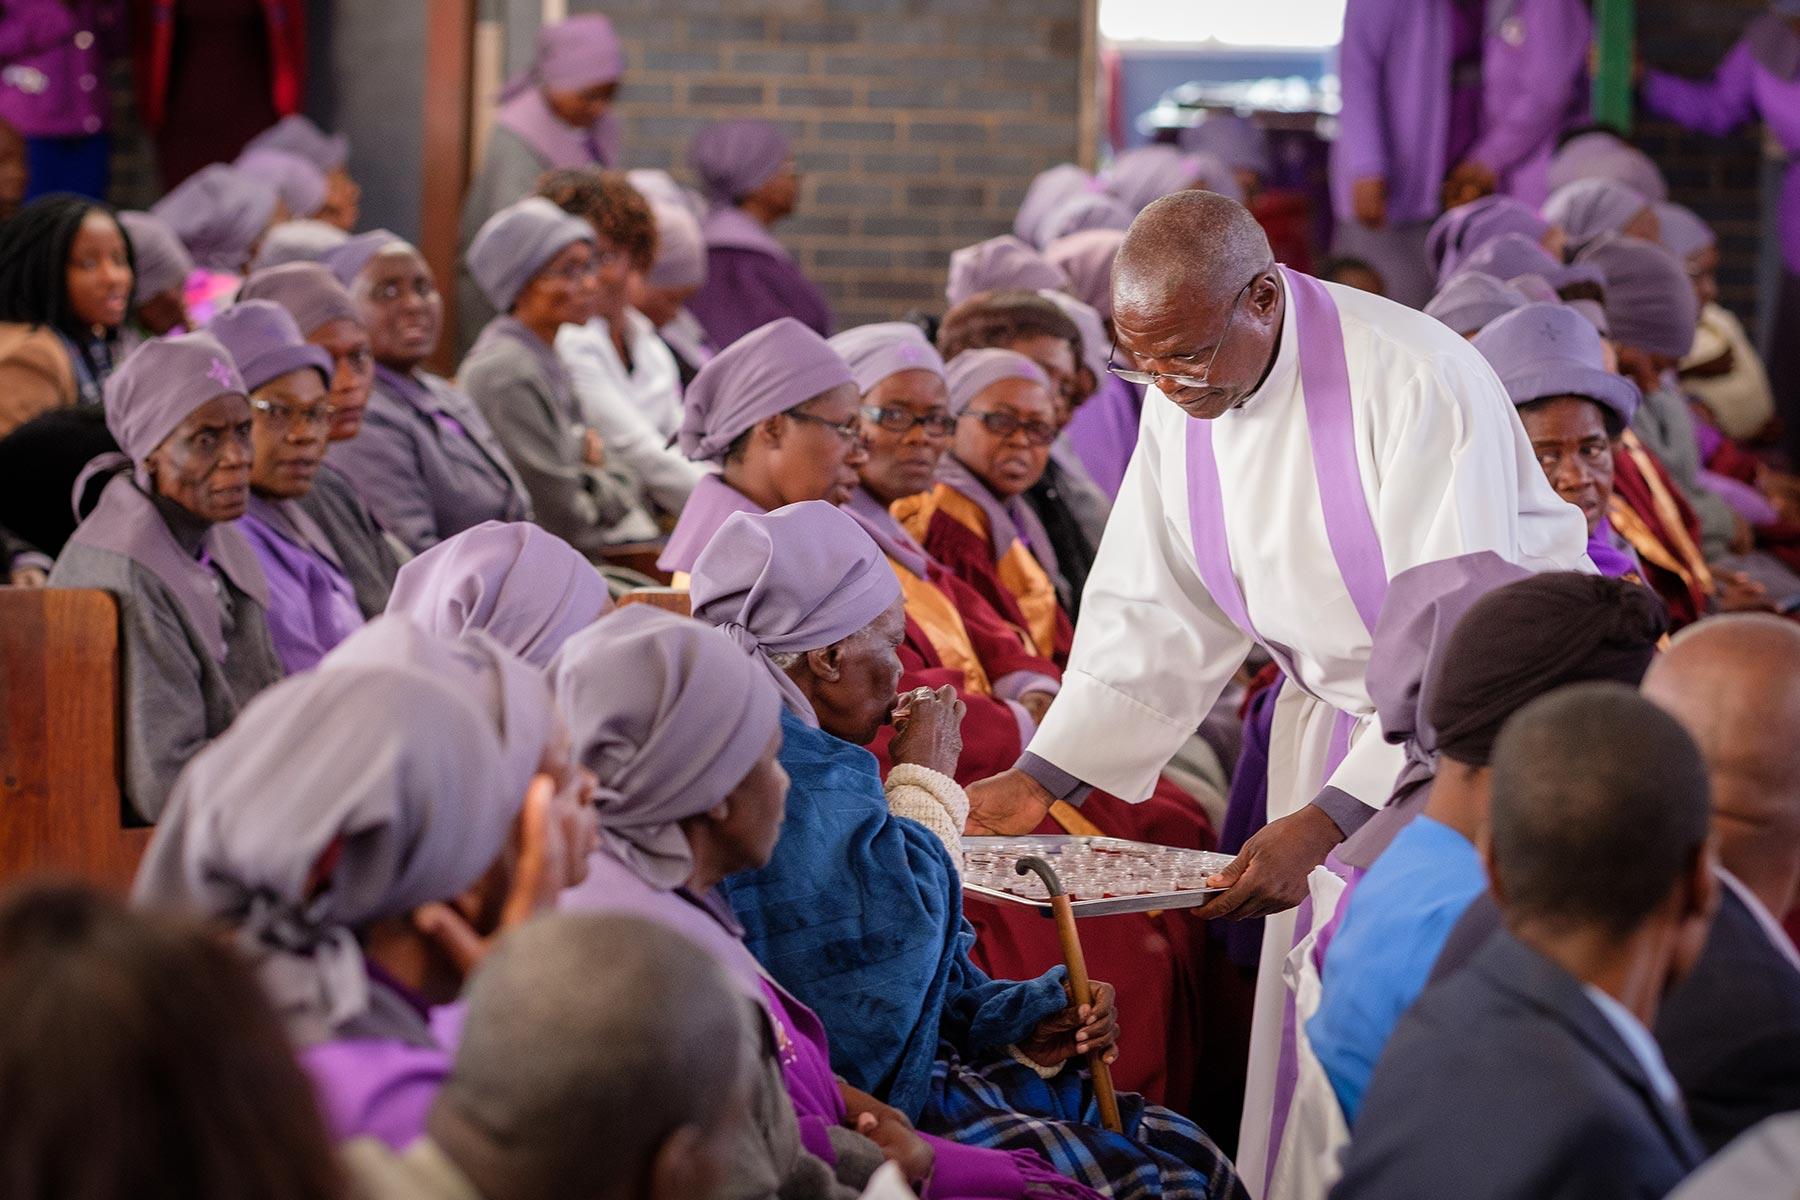 Before theÂ COVID-19 pandemic, the LWF General Secretary paid a solidarity visit to Zimbabwe.Â In this photo, a pastor distributesÂ Holy Communion during worship at theÂ NjubeÂ CenterÂ parish of the Evangelical Lutheran Church in Zimbabwe.Â Photo: LWF/A. Danielsson